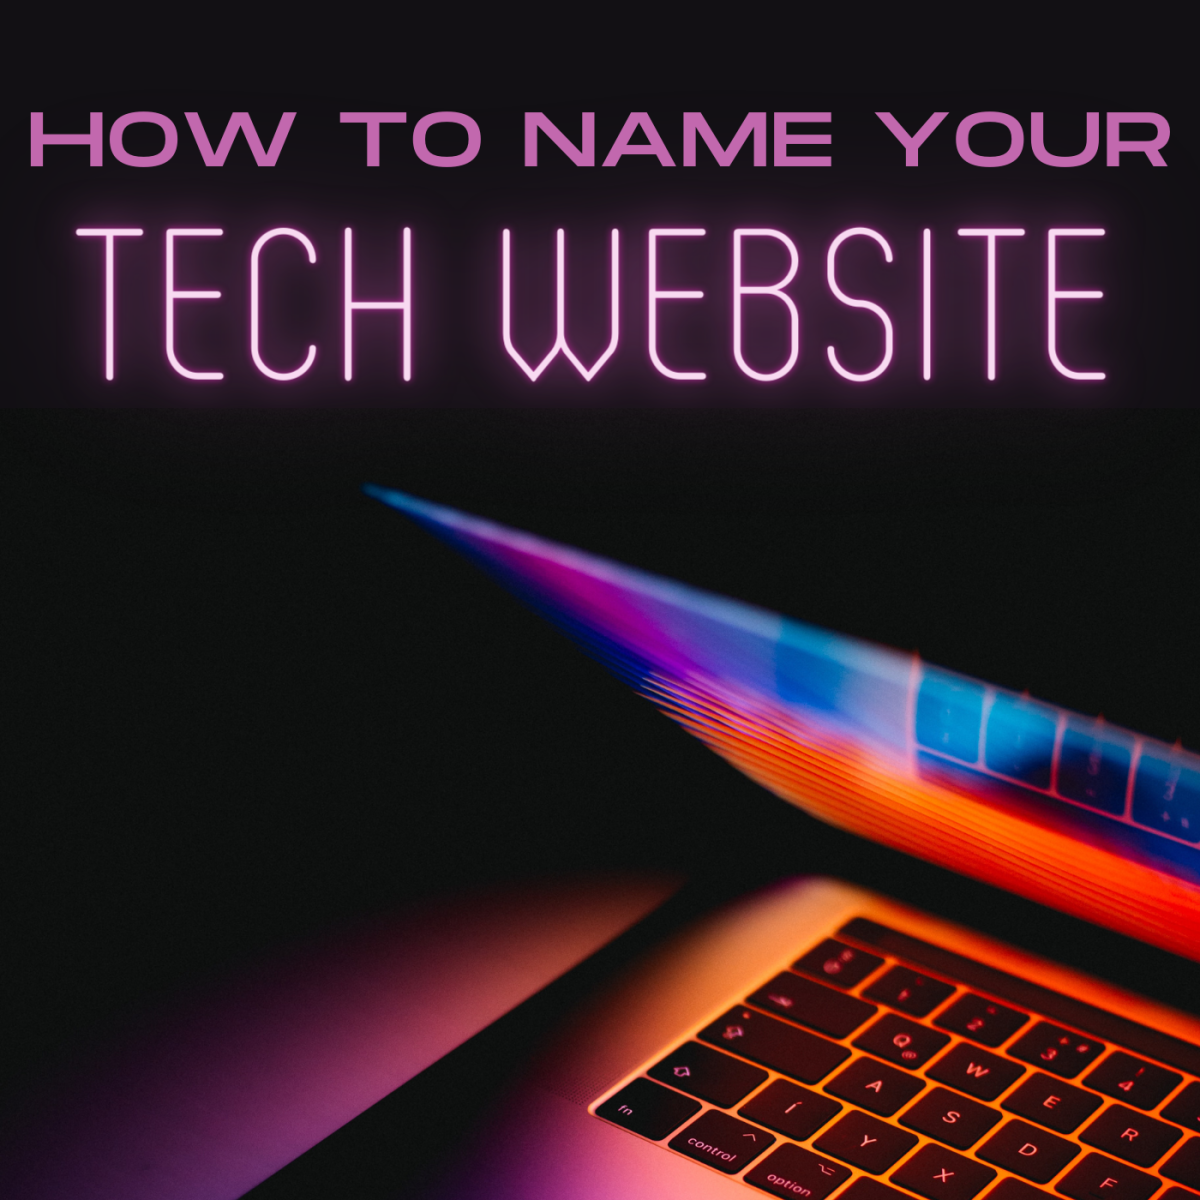 Tips for naming your new tech website